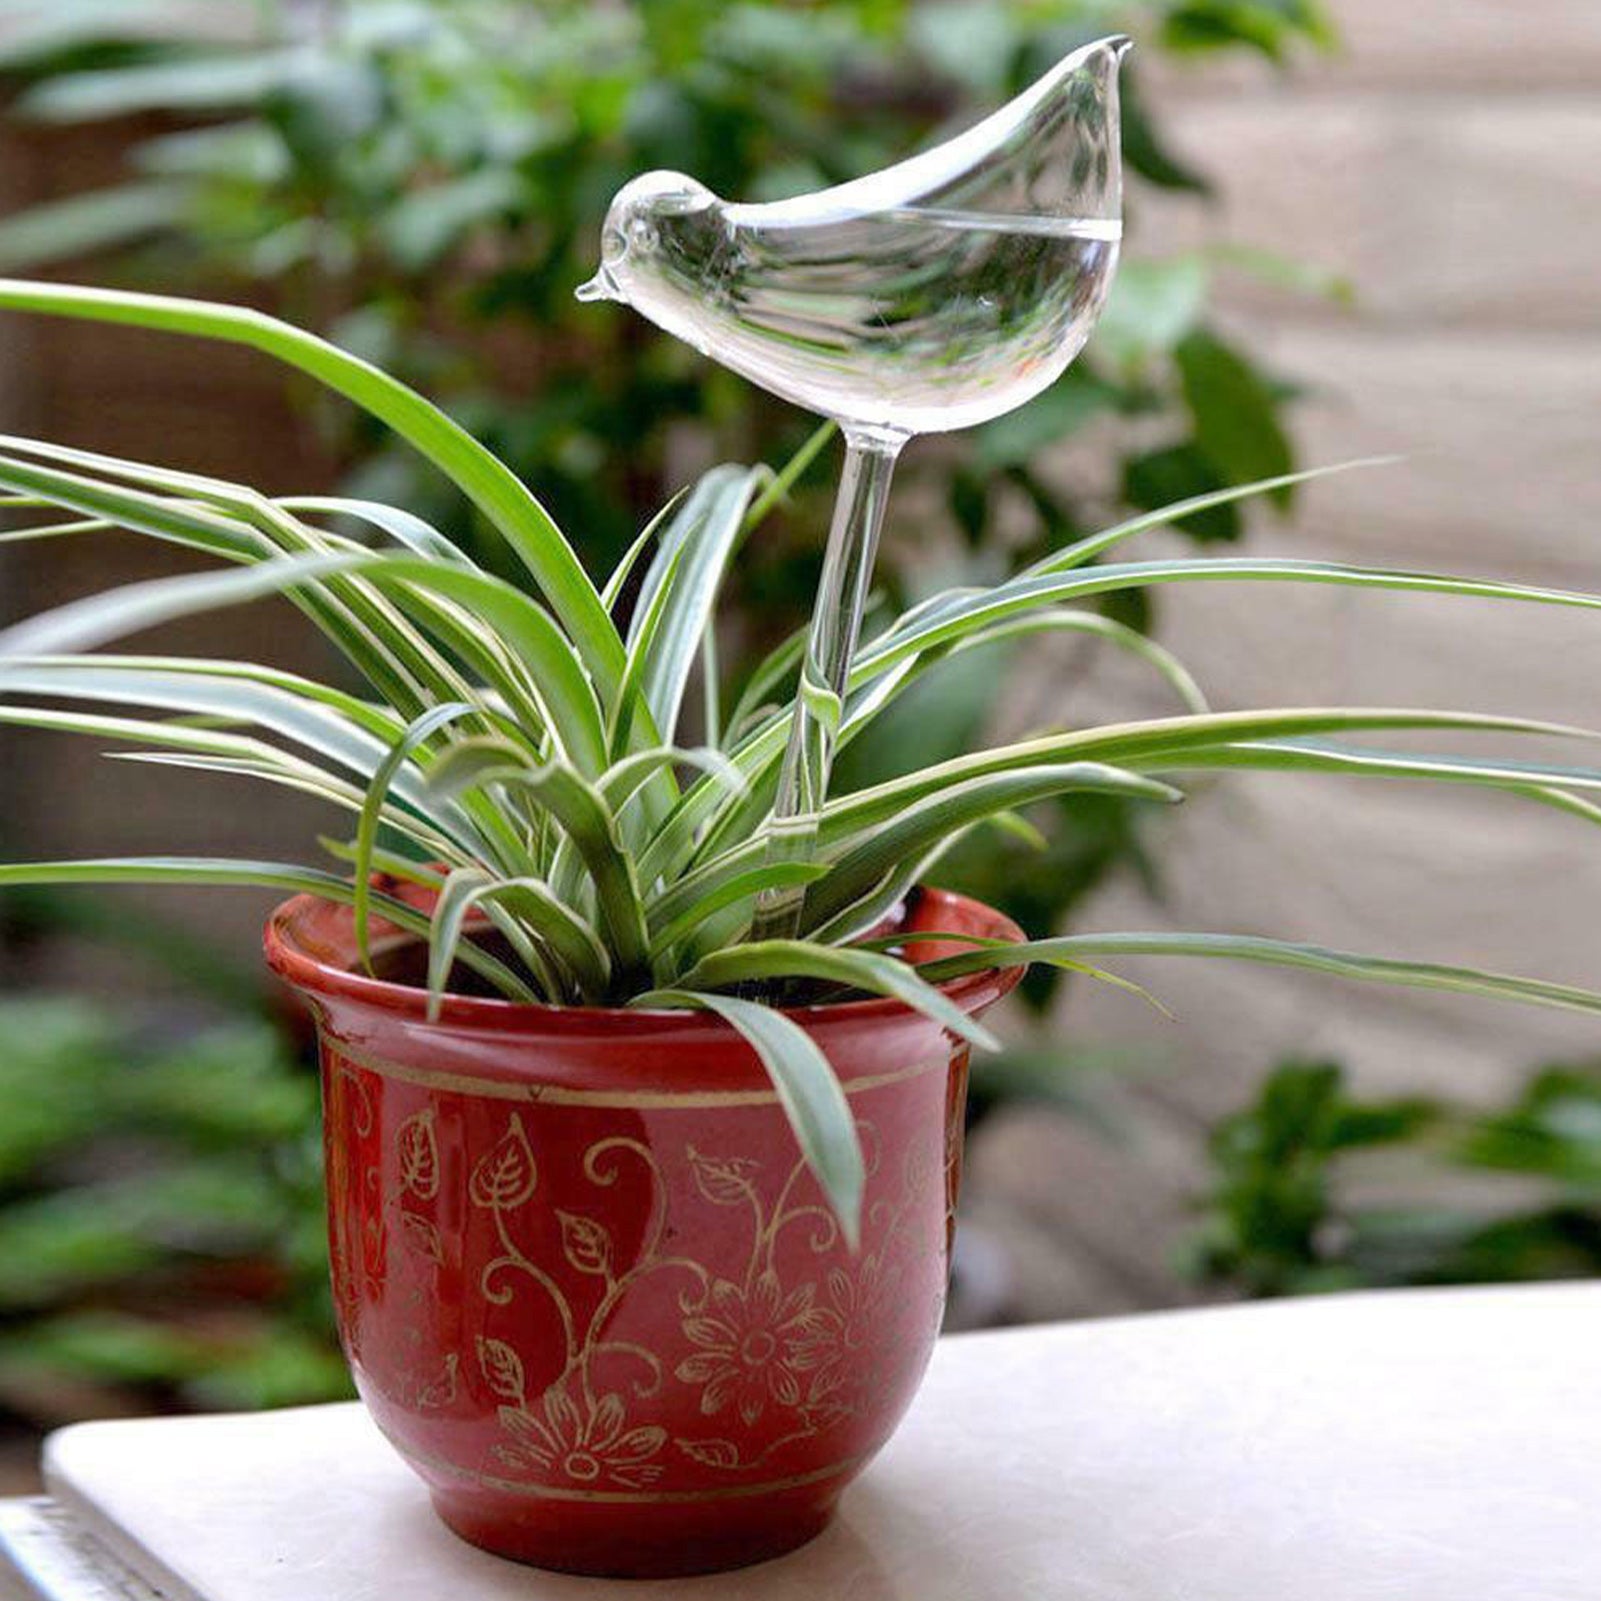 DraggmePartty Houseplant Automatic Self Watering Glass Bird Watering Cans Flowers Plant Decorative Clear Glass Watering Device